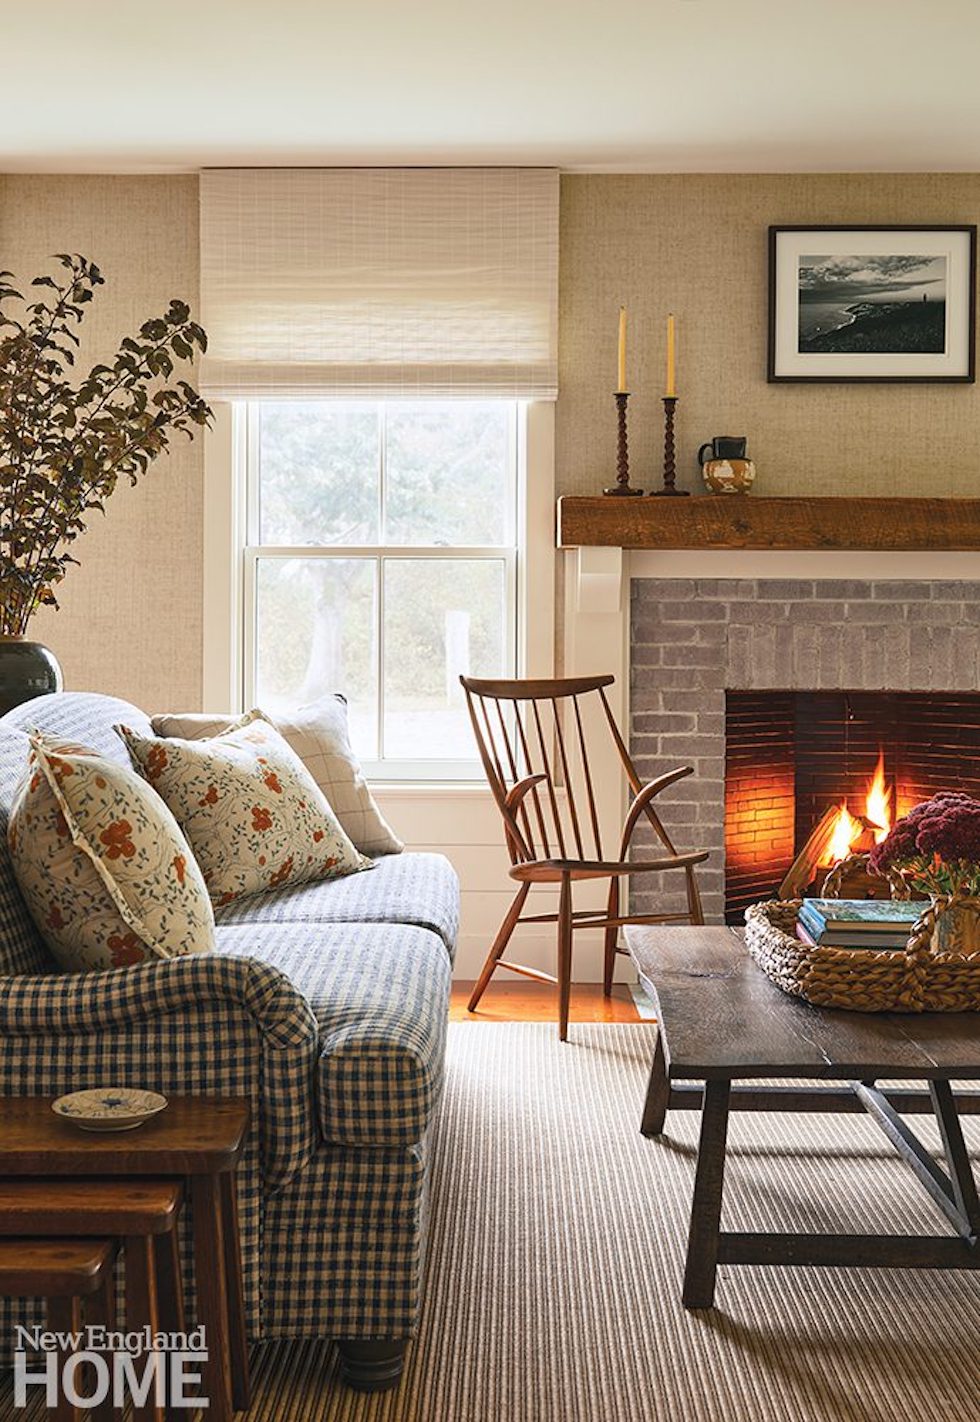 Inspired By: A Cozy Island Home on Martha's Vineyard